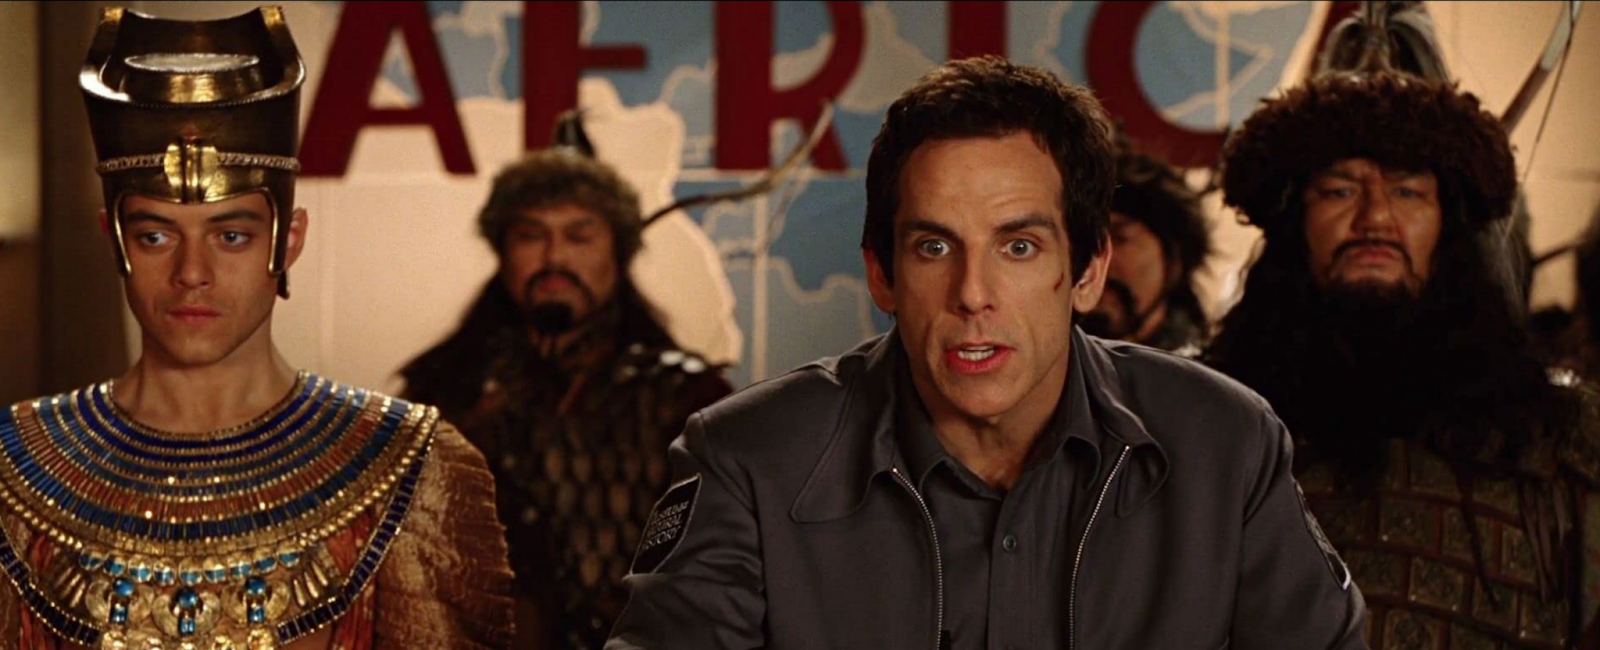 Where Was Night at the Museum Filmed? Scene with Ben Stiller 